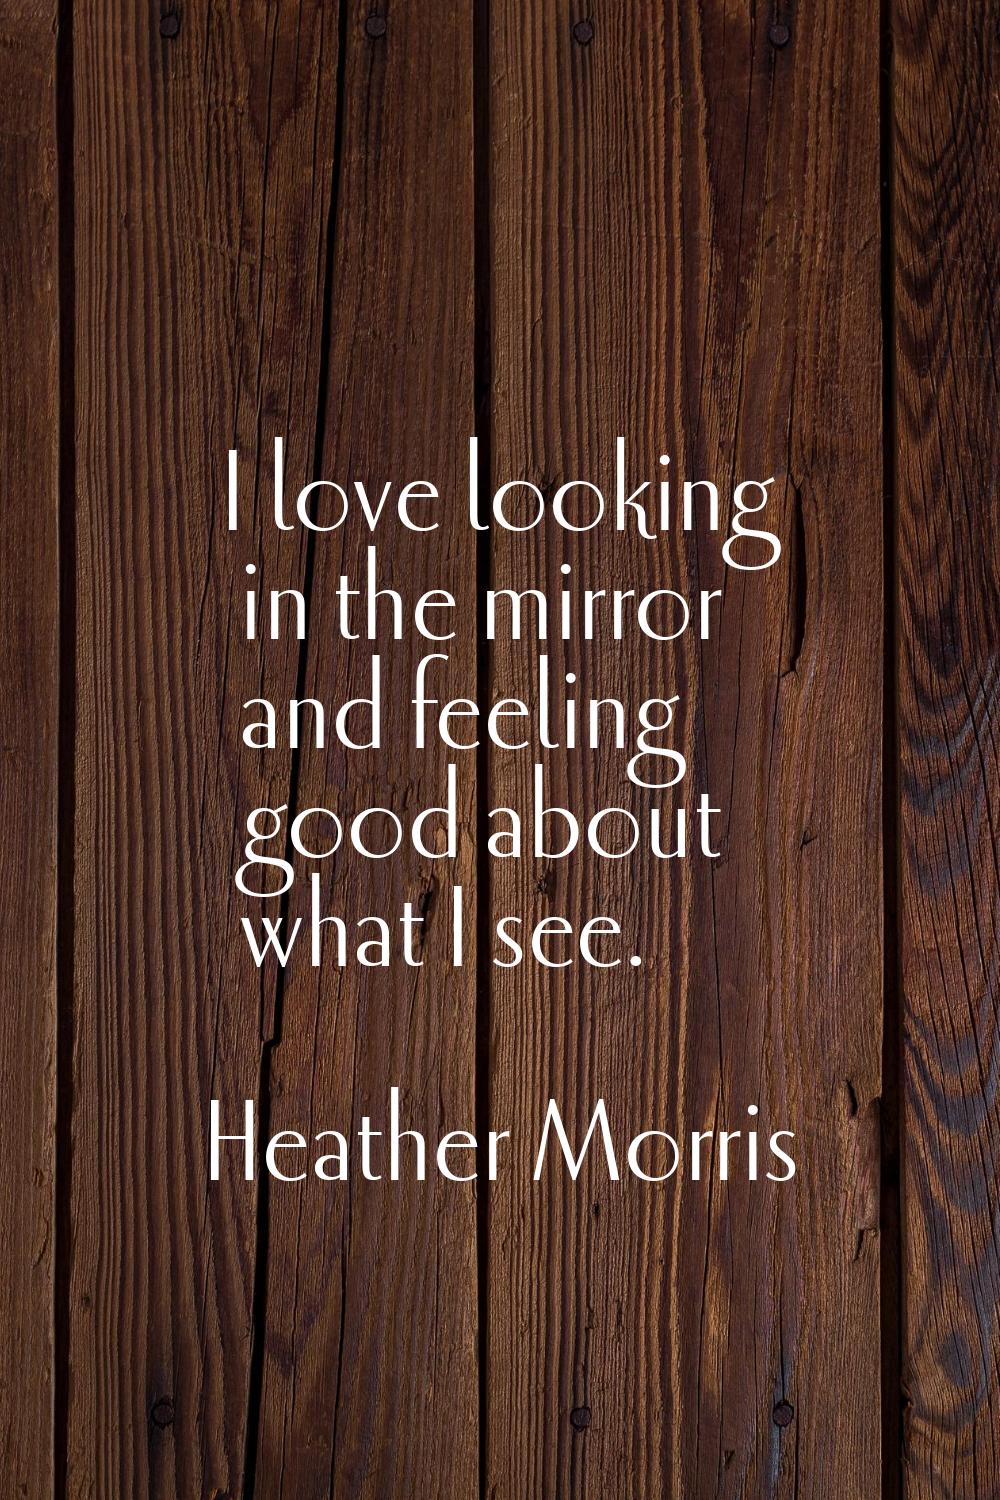 I love looking in the mirror and feeling good about what I see.